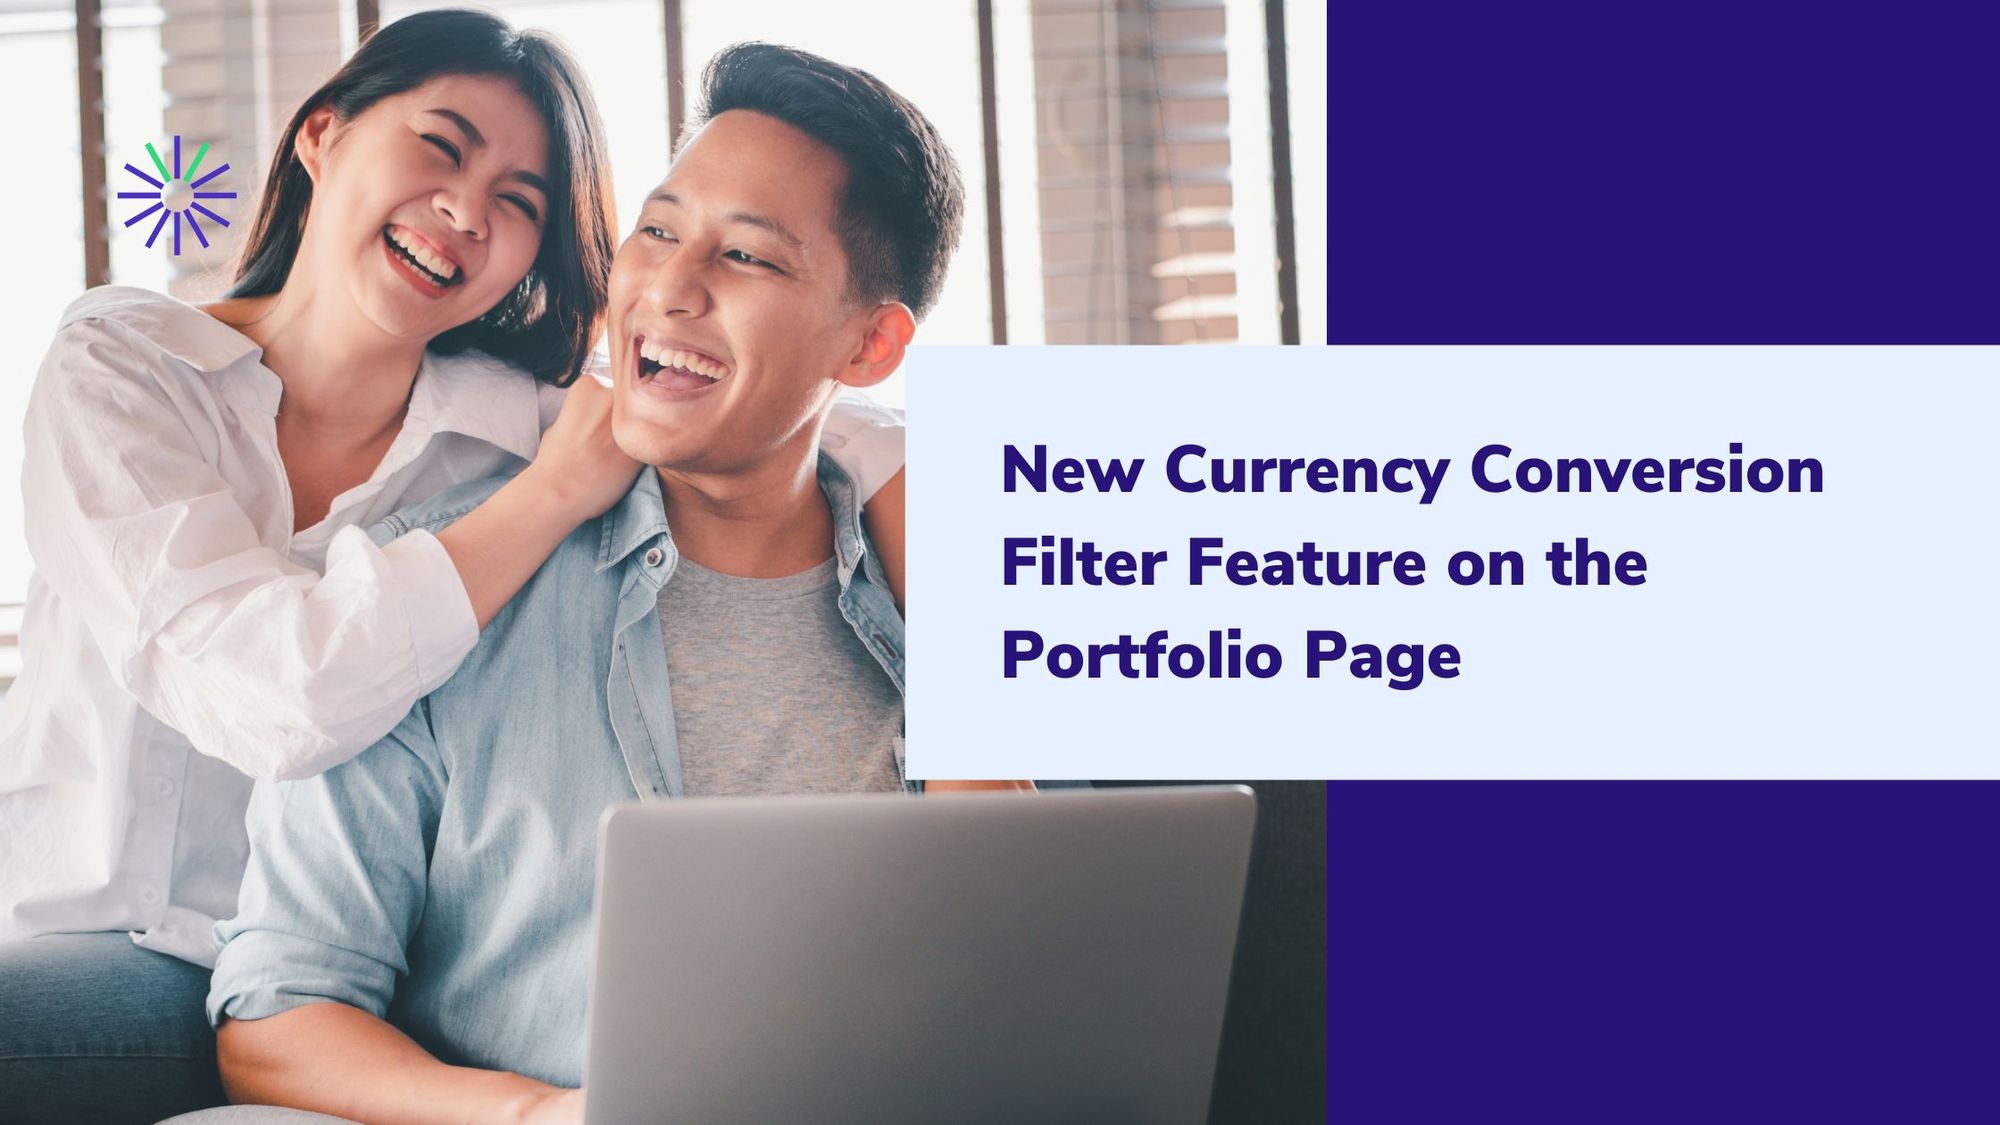 New Currency Conversion Filter Feature on the Portfolio Page